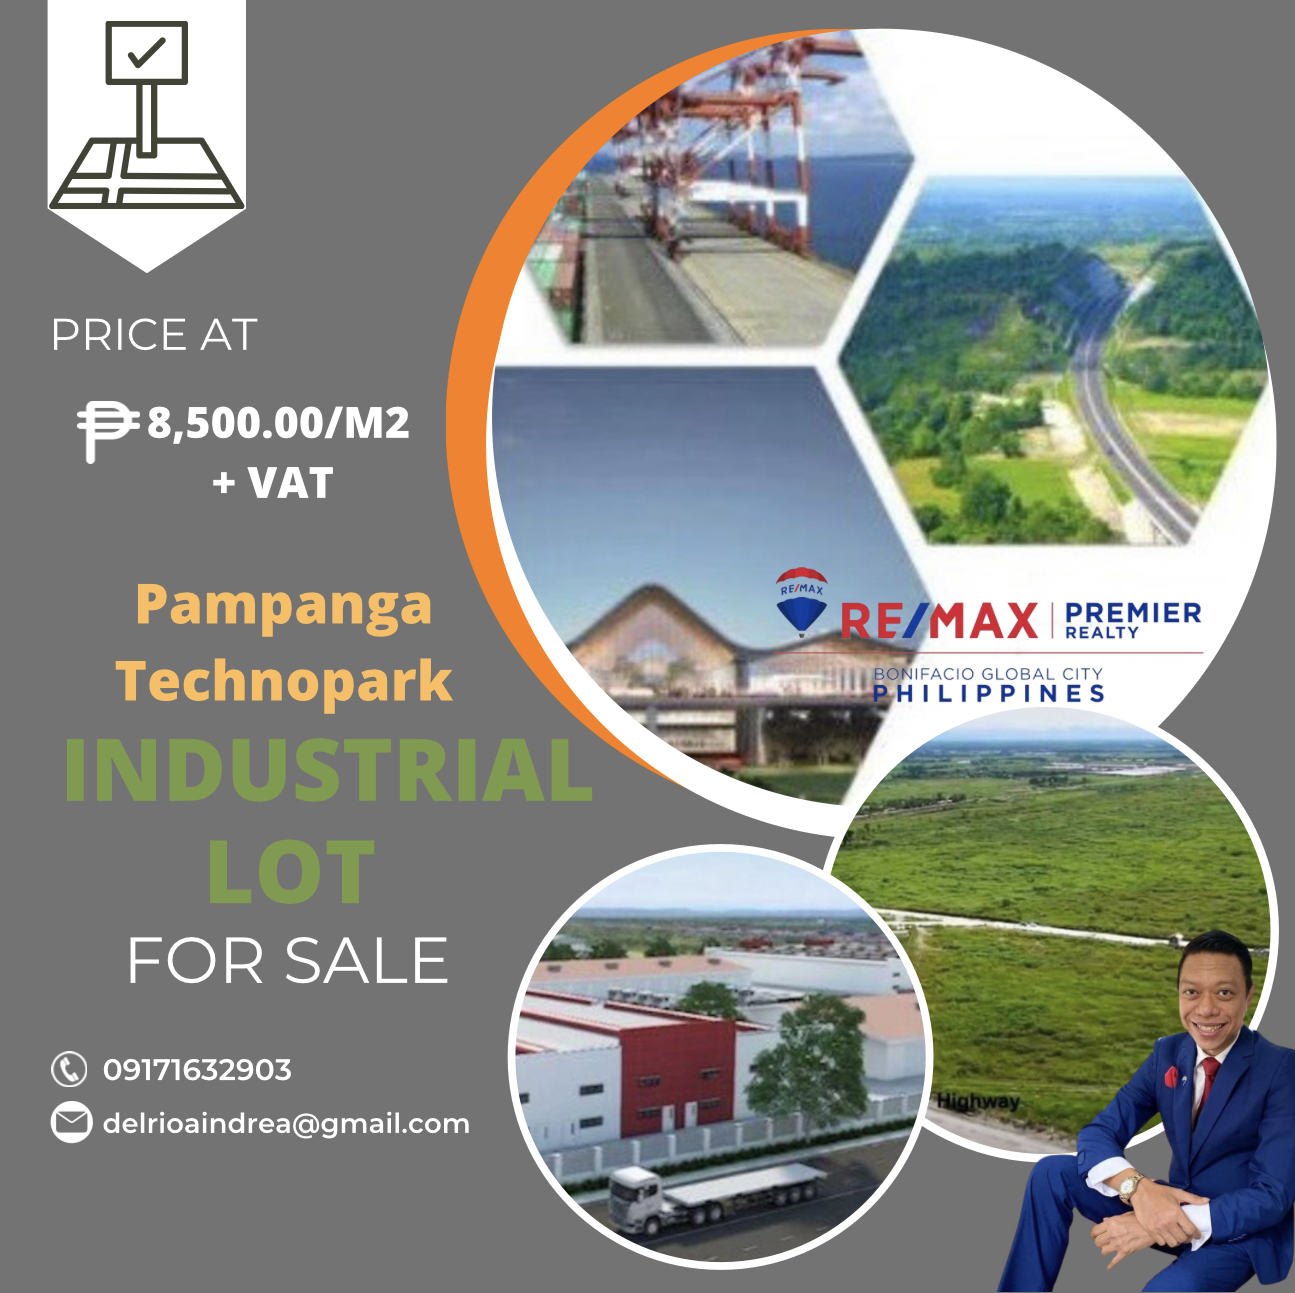 INDUSTRIAL LOT FOR SALE in Pampanga Technopark‼️